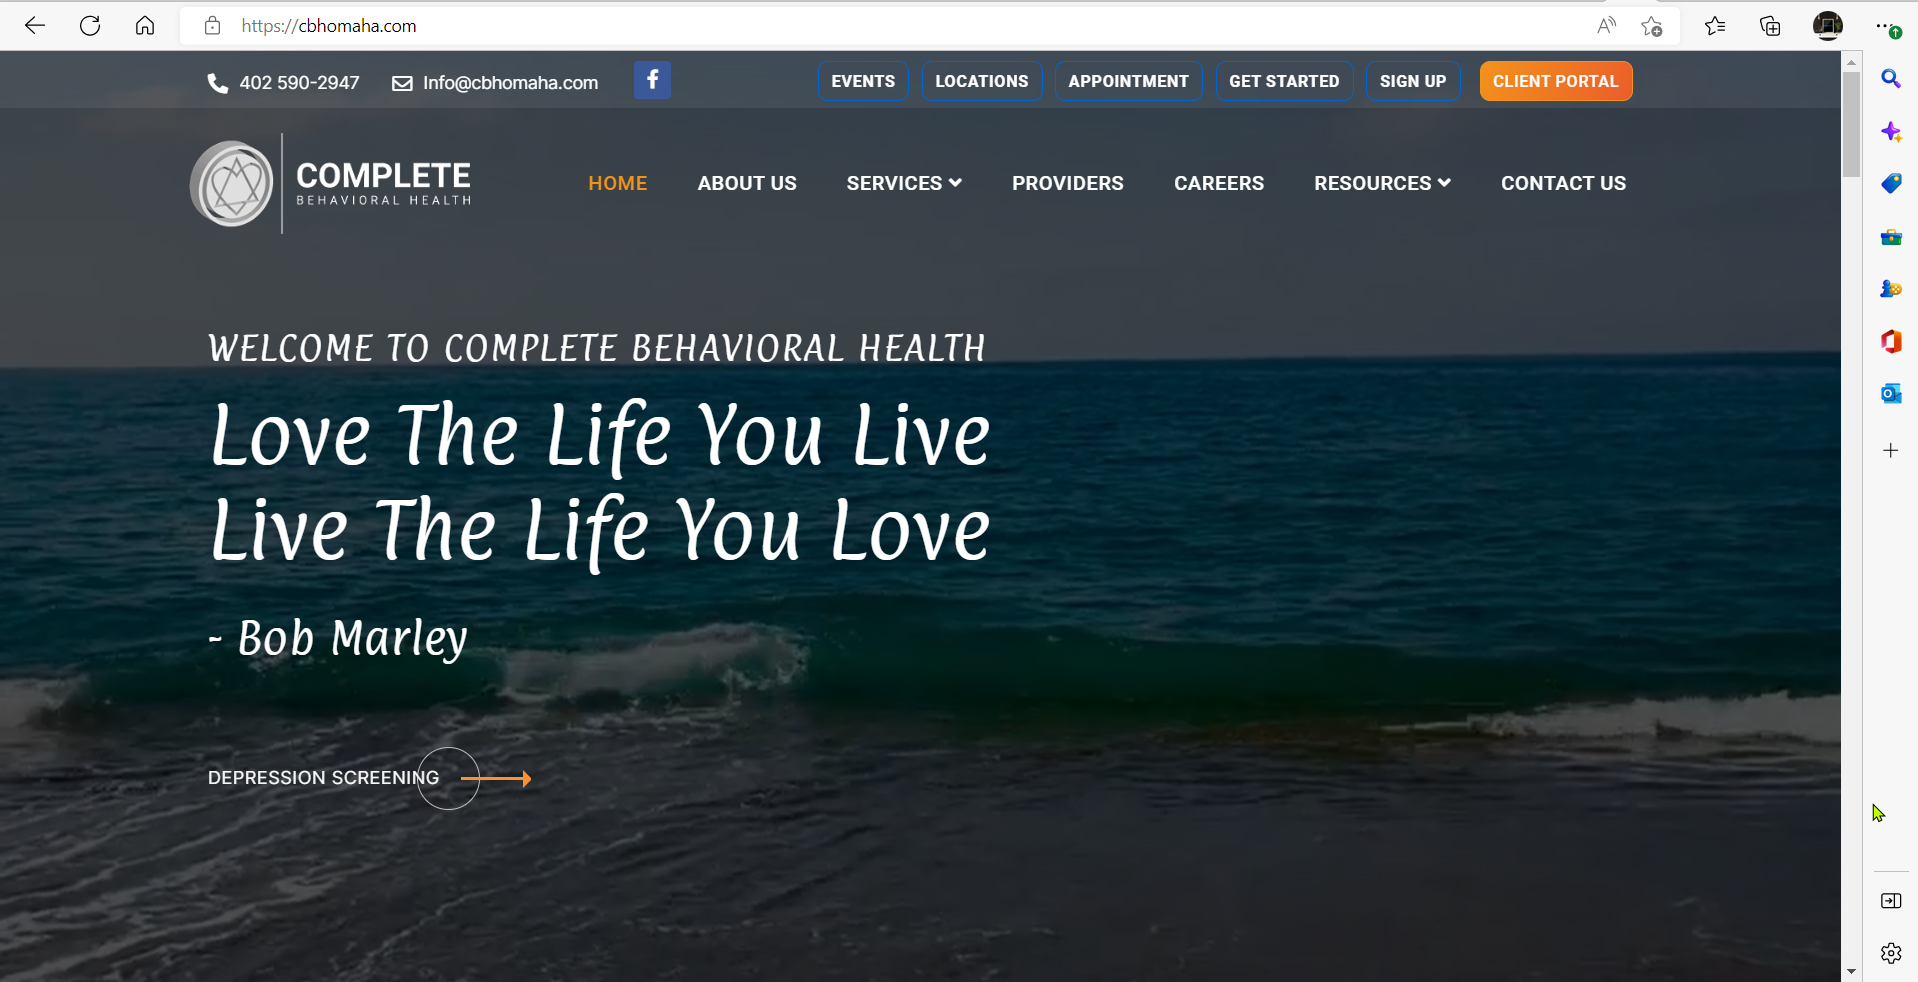 NAOSSOFT Launches New Website for Complete Behavioral Health